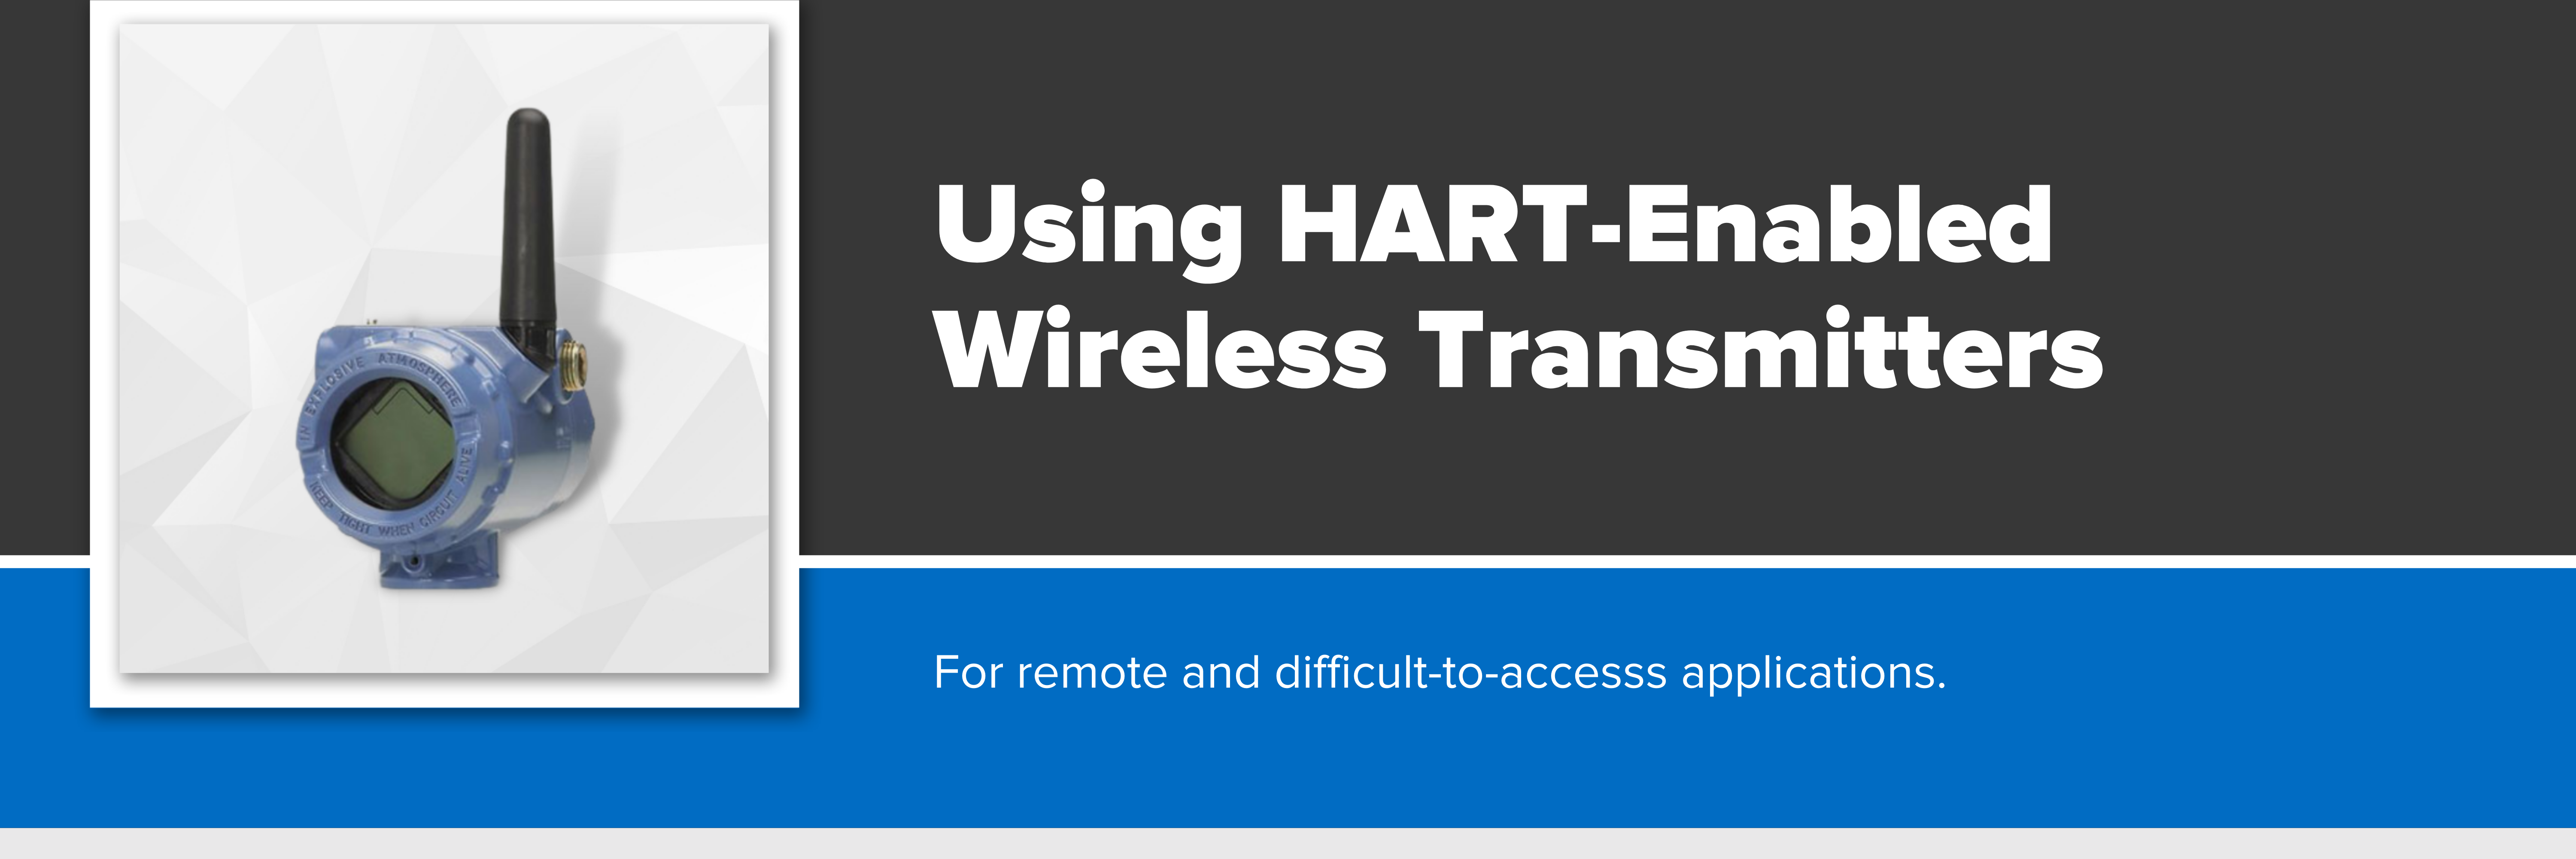 Header image with text "Using HART-Enabled Wireless Transmitters"